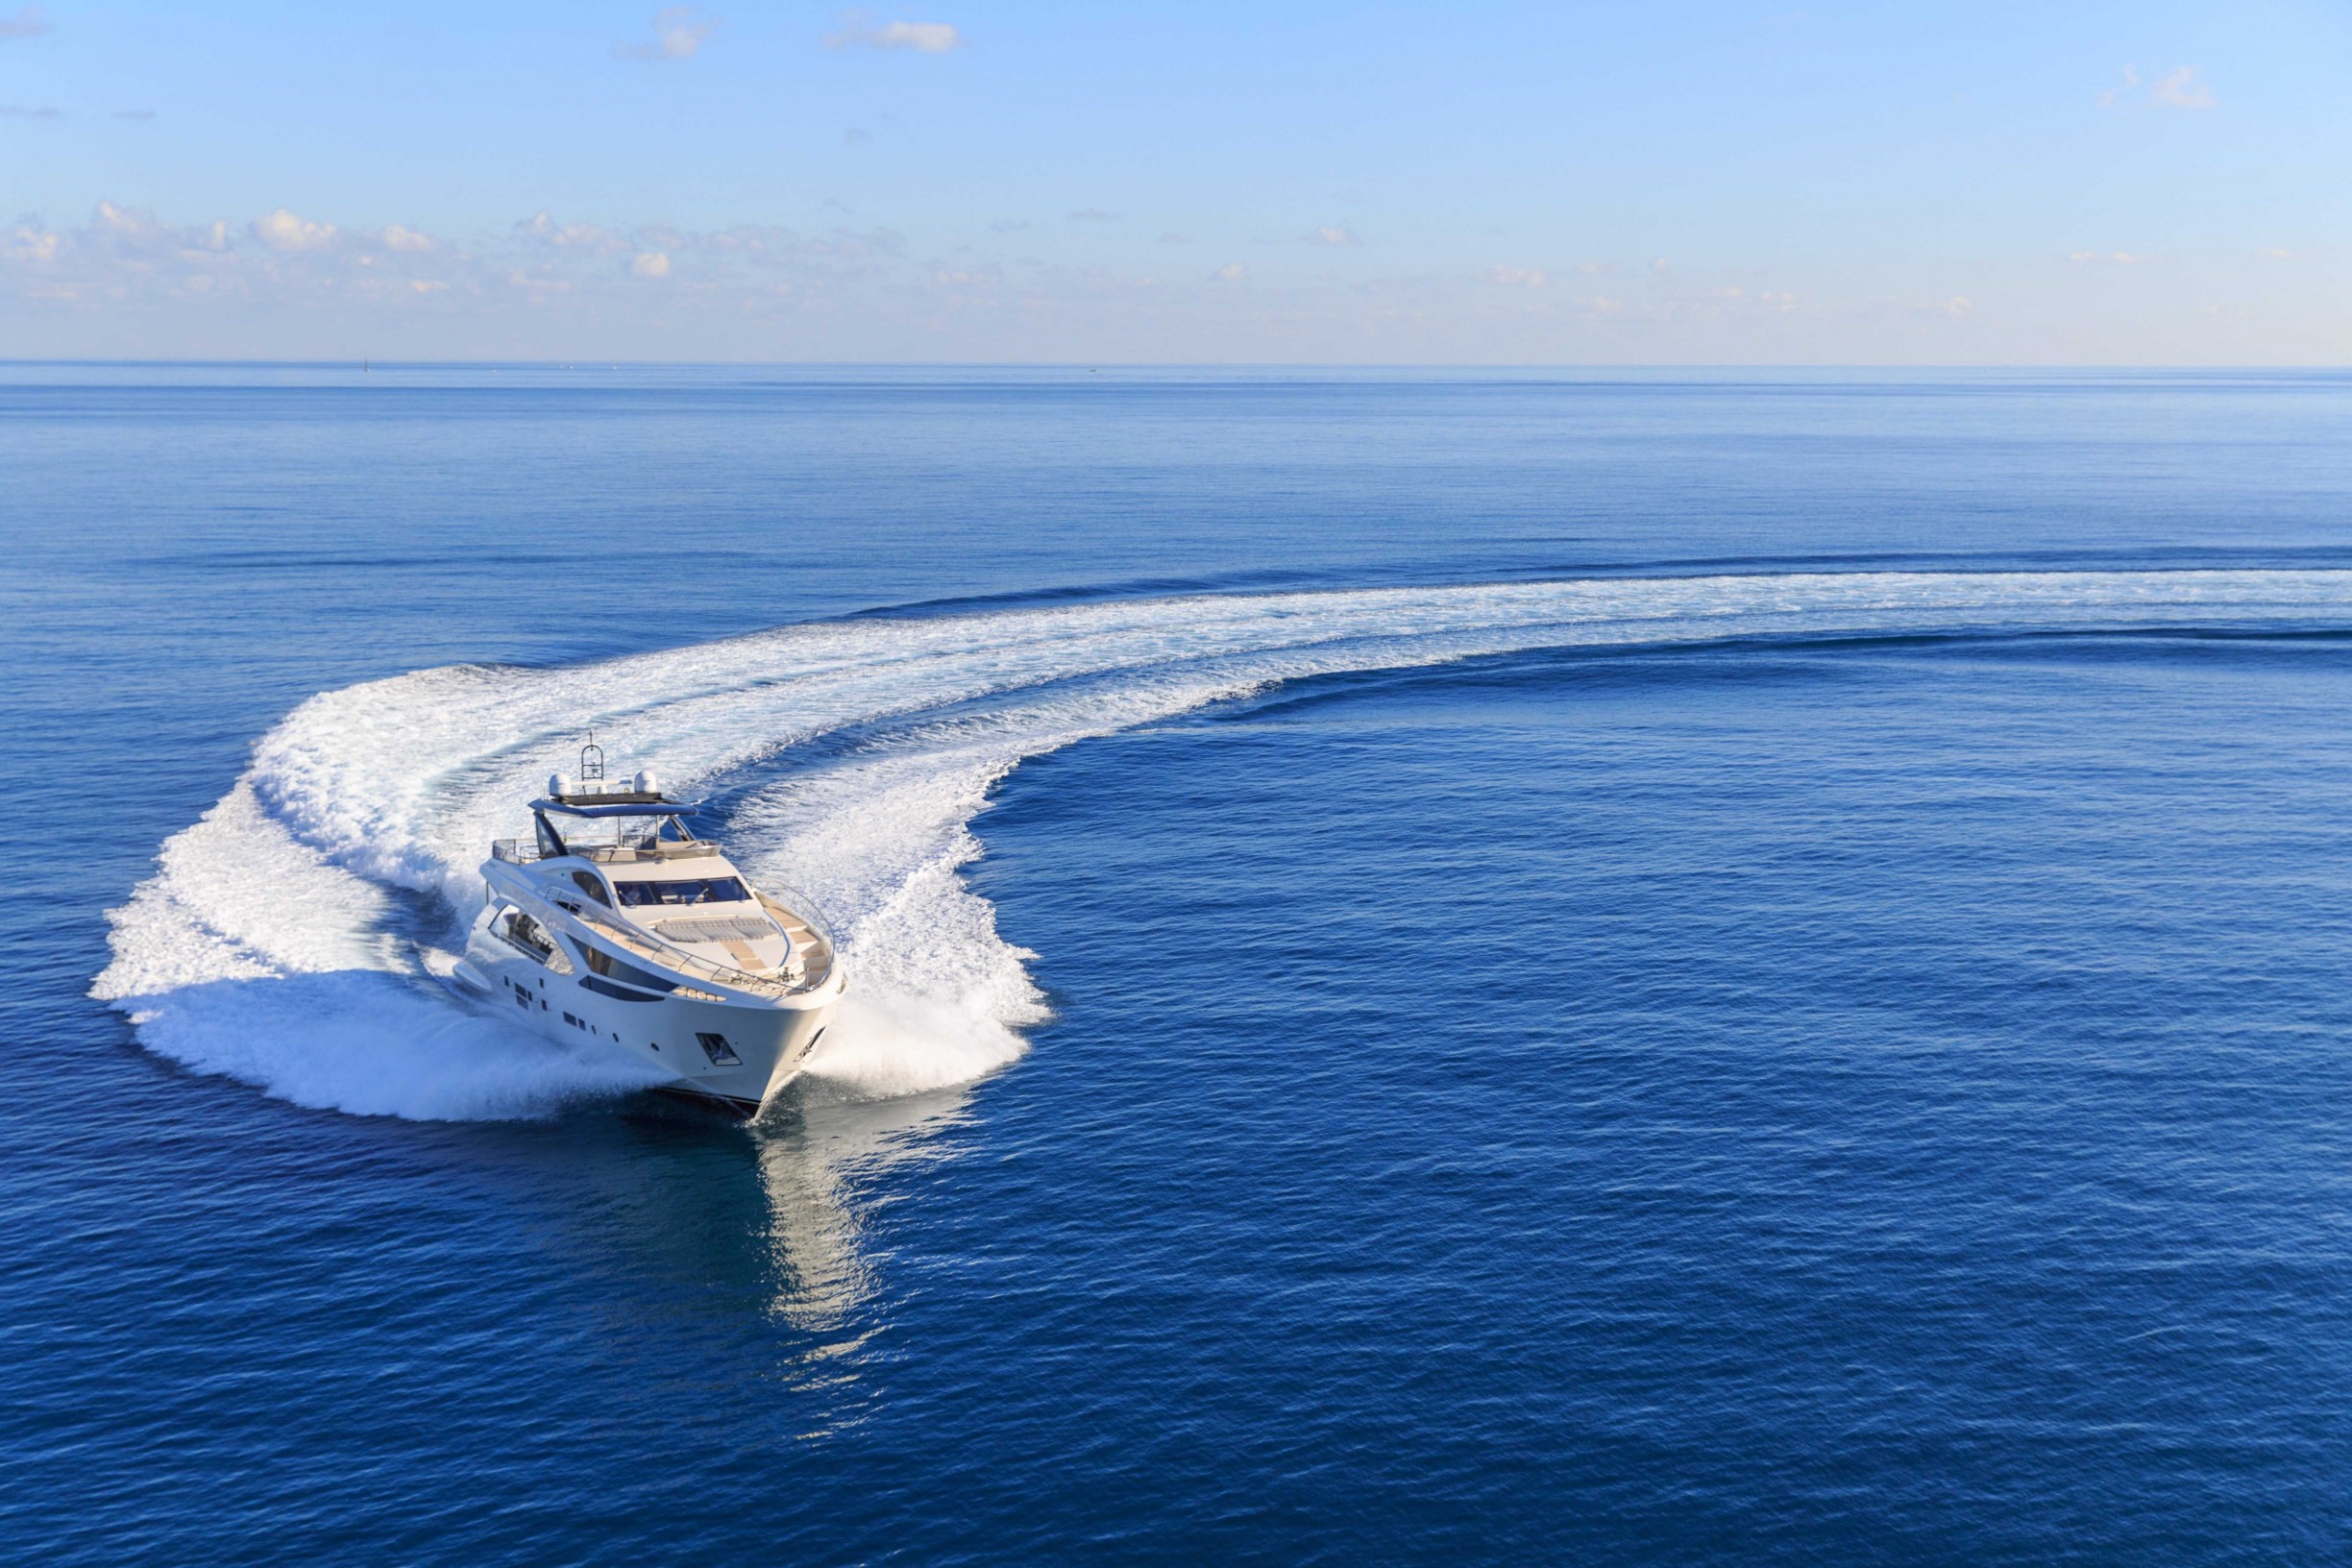 Yacht at sea with waves in water